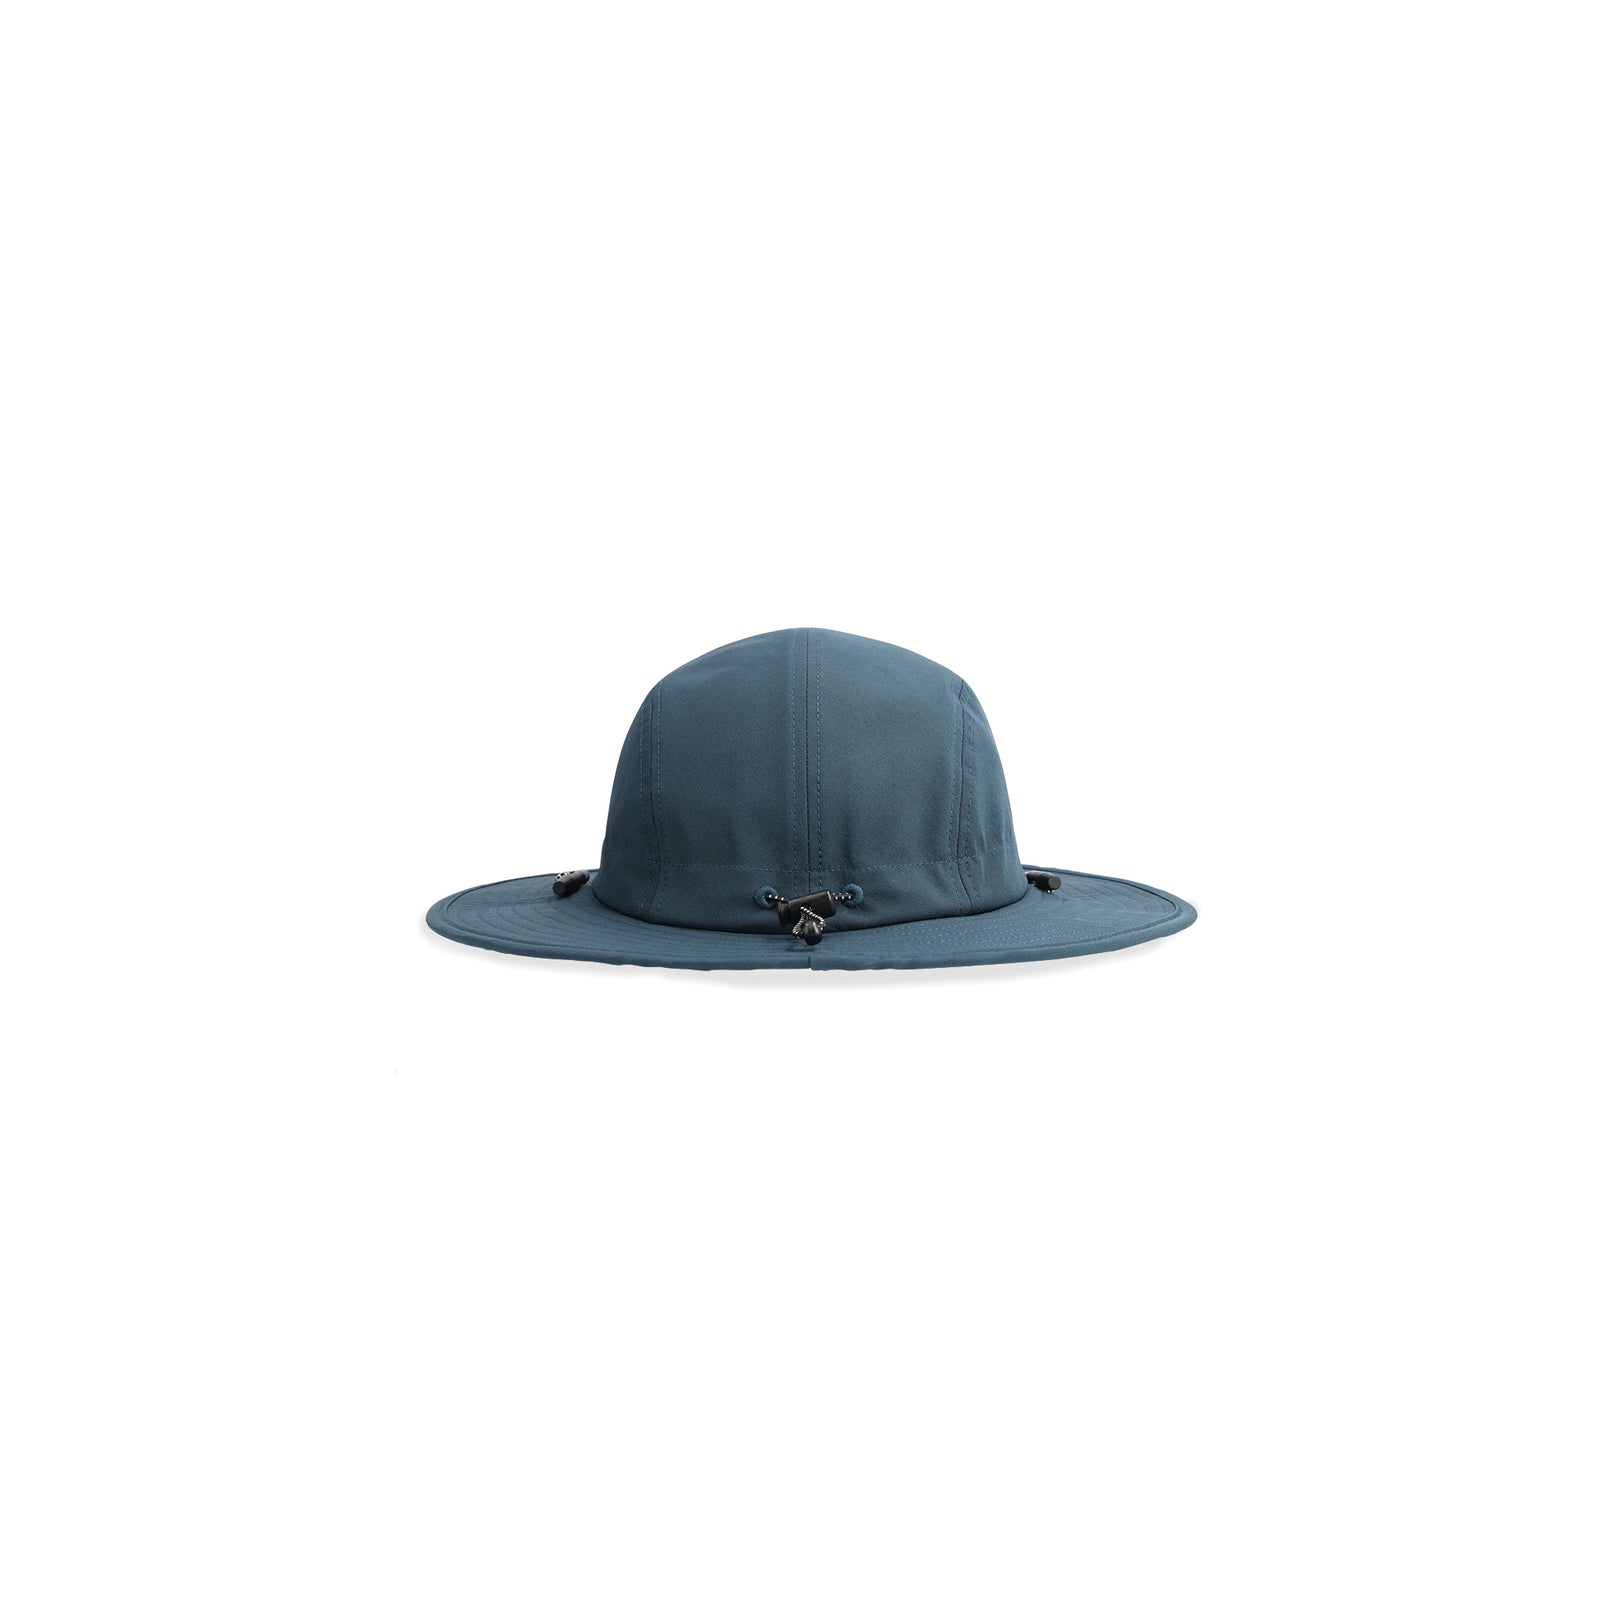 Back View of Topo Designs Sun Hat in "Pond Blue"